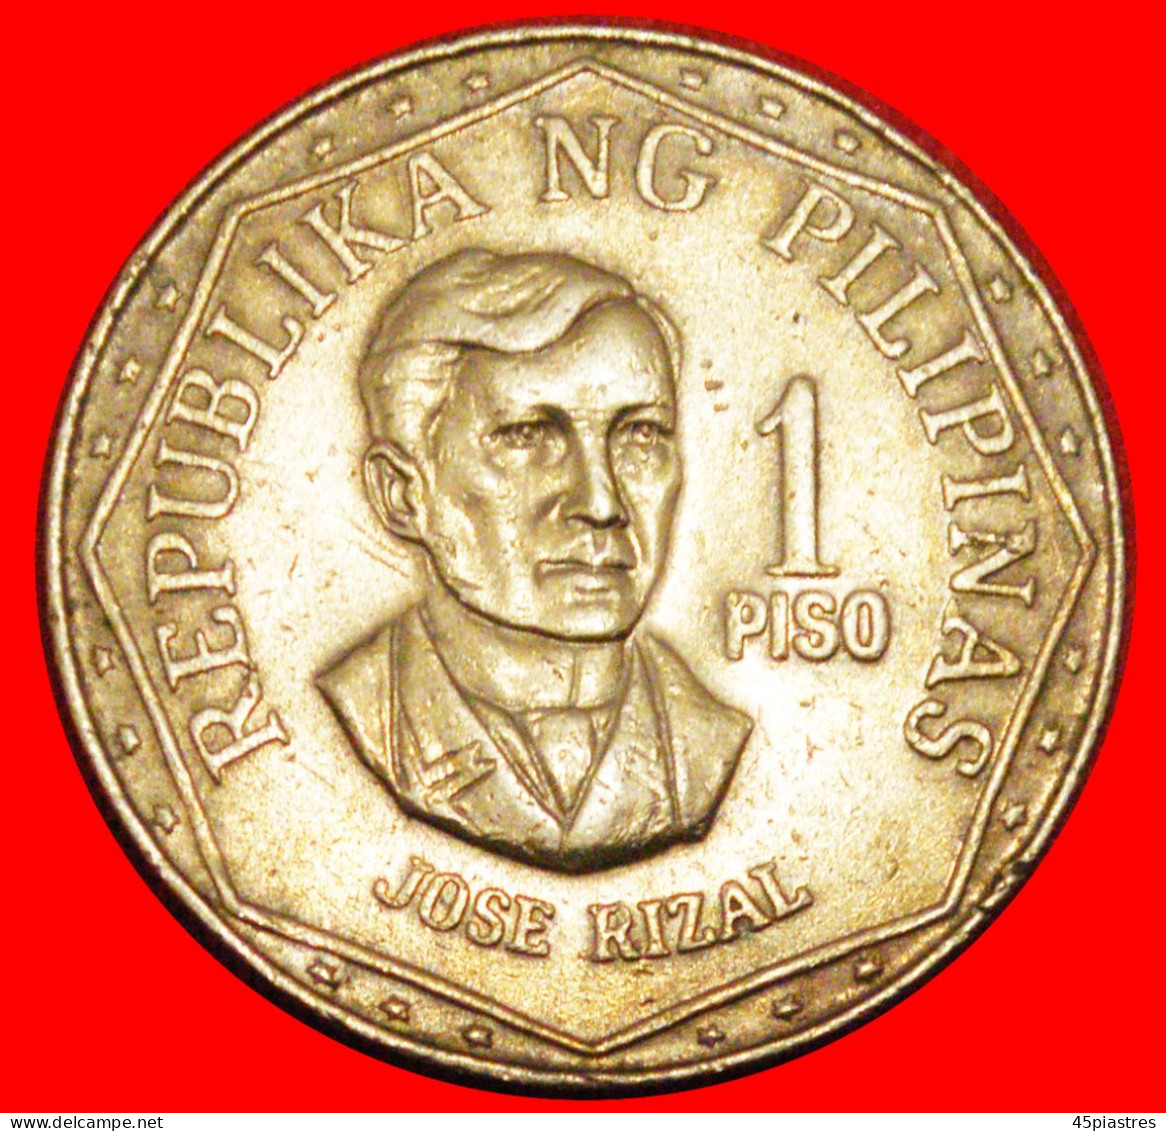 * USA (?) JOSE RIZAL (1861-1896): PHILIPPINES  1 PISO 1978 LARGE TYPE 1975-1982! · LOW START ·  NO RESERVE! - Philippines